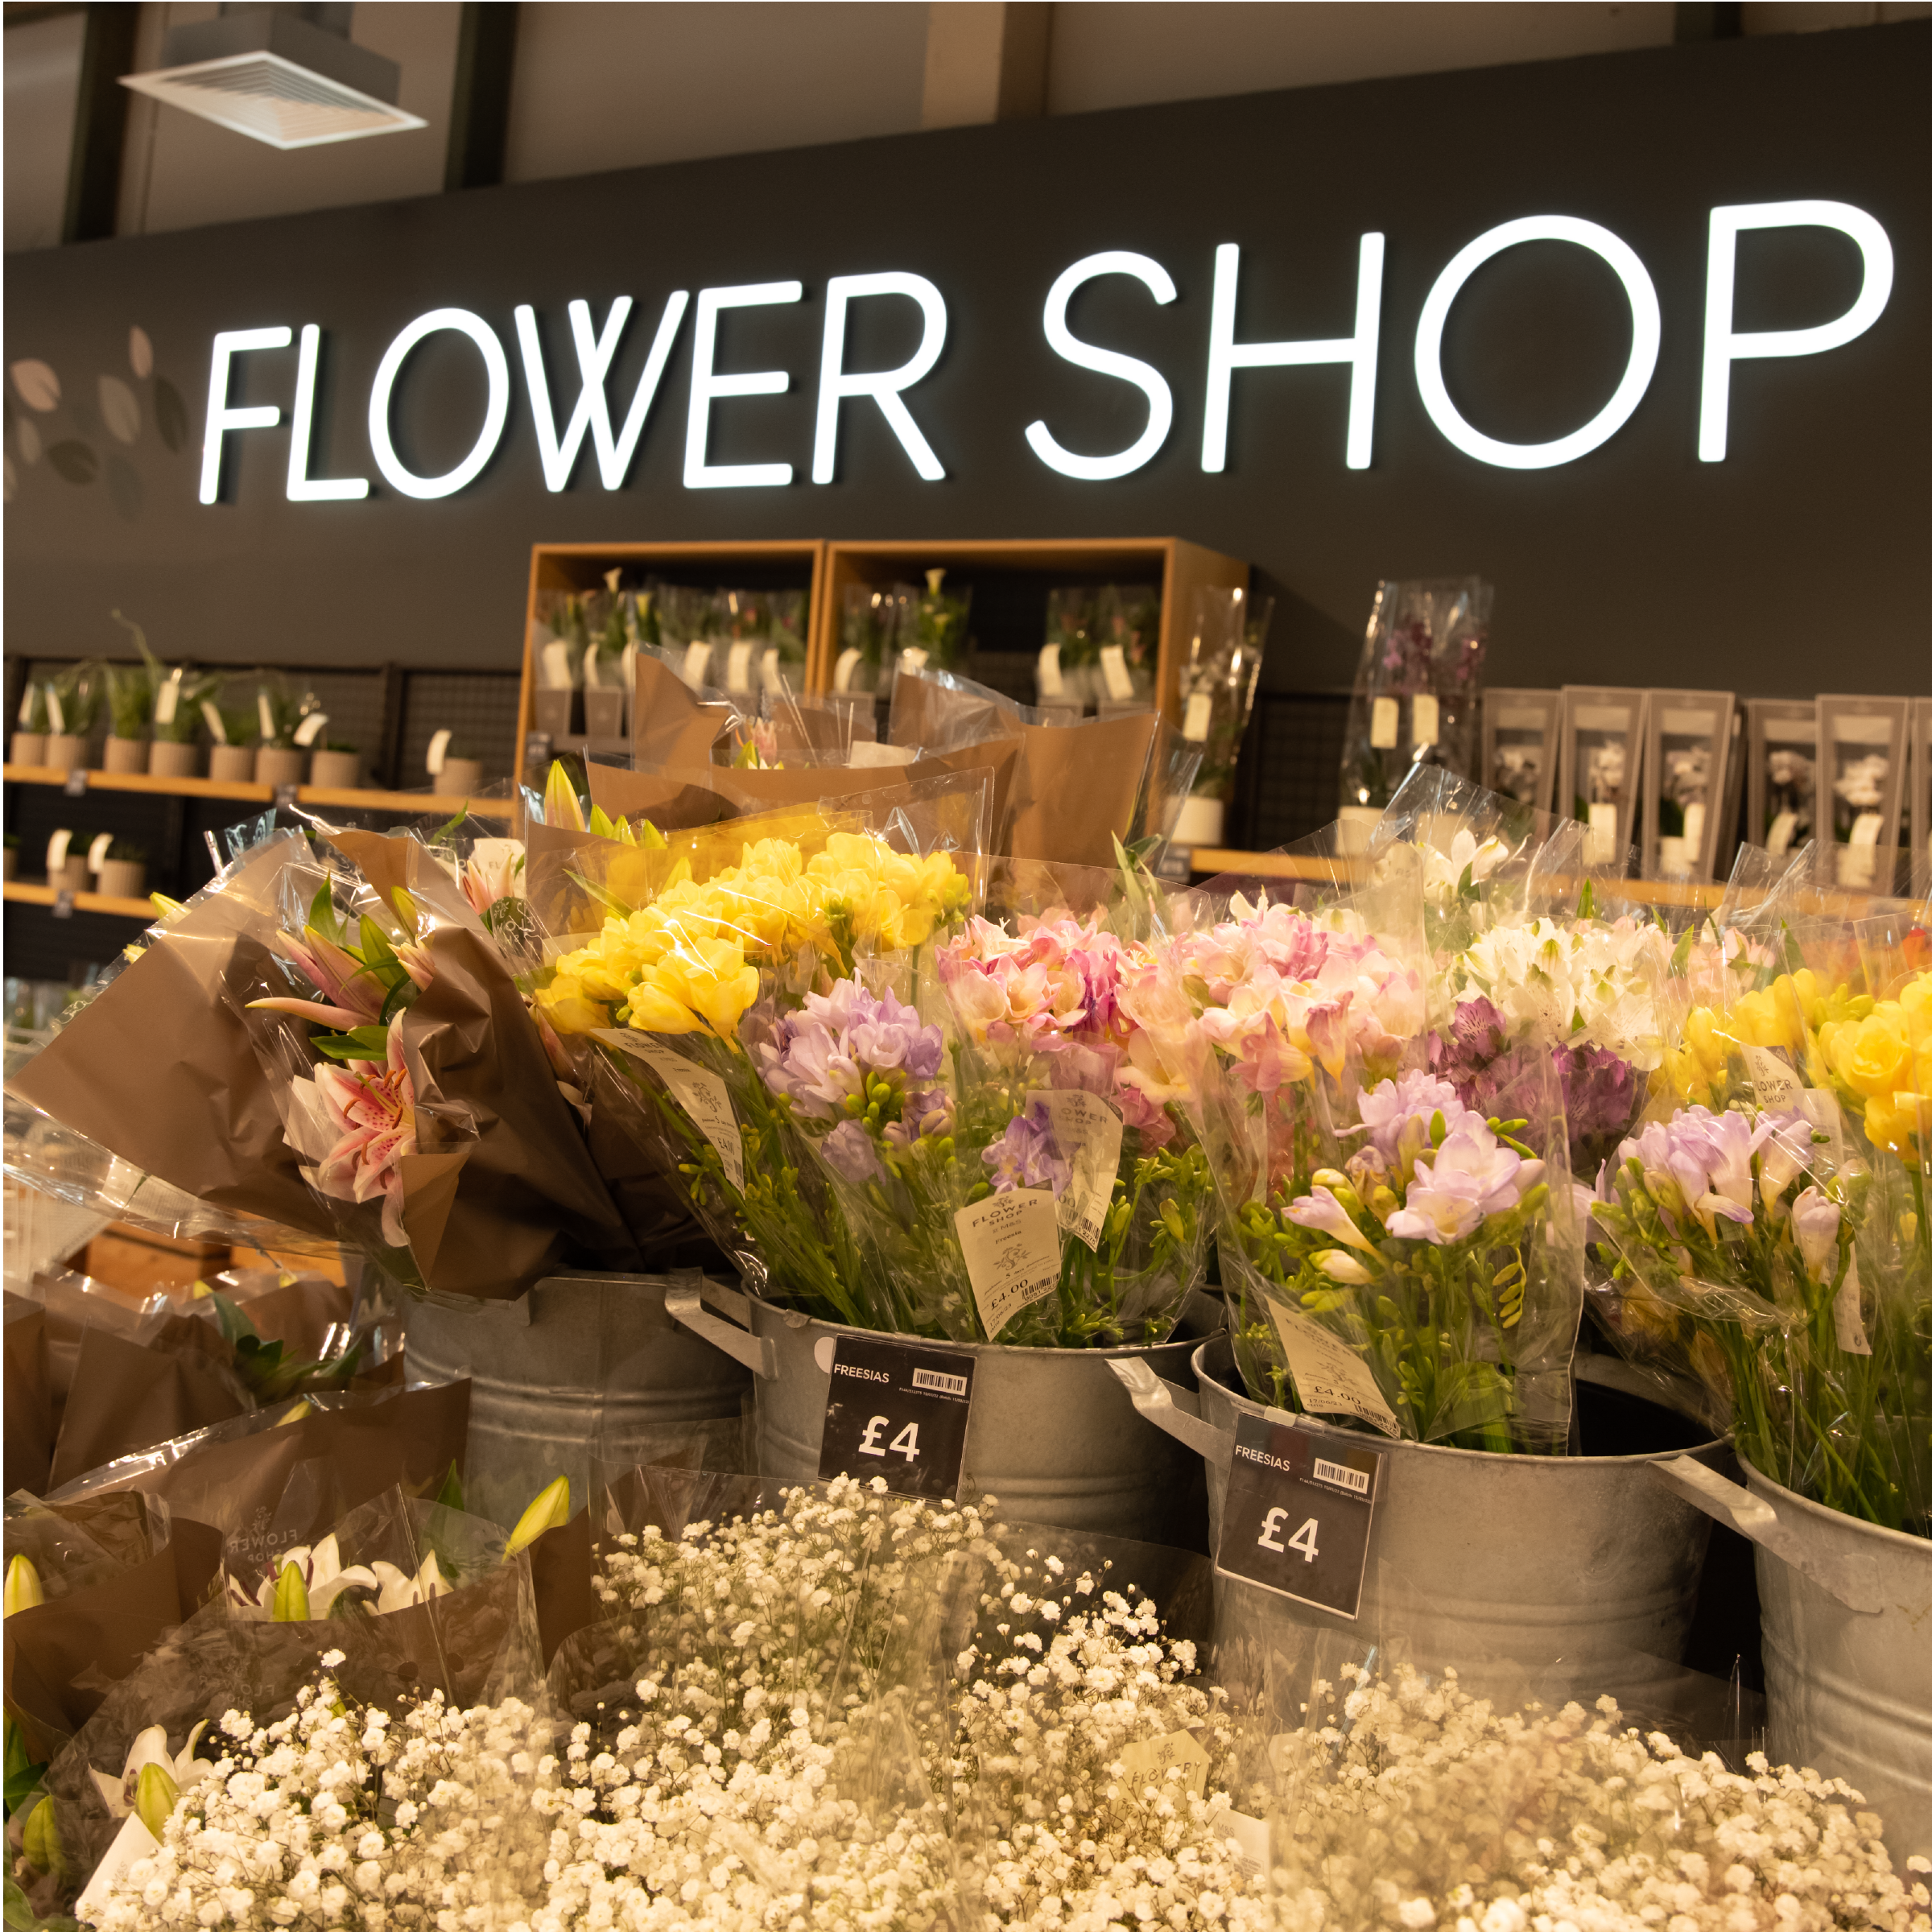 Flower Shop at M&S Sprucefield